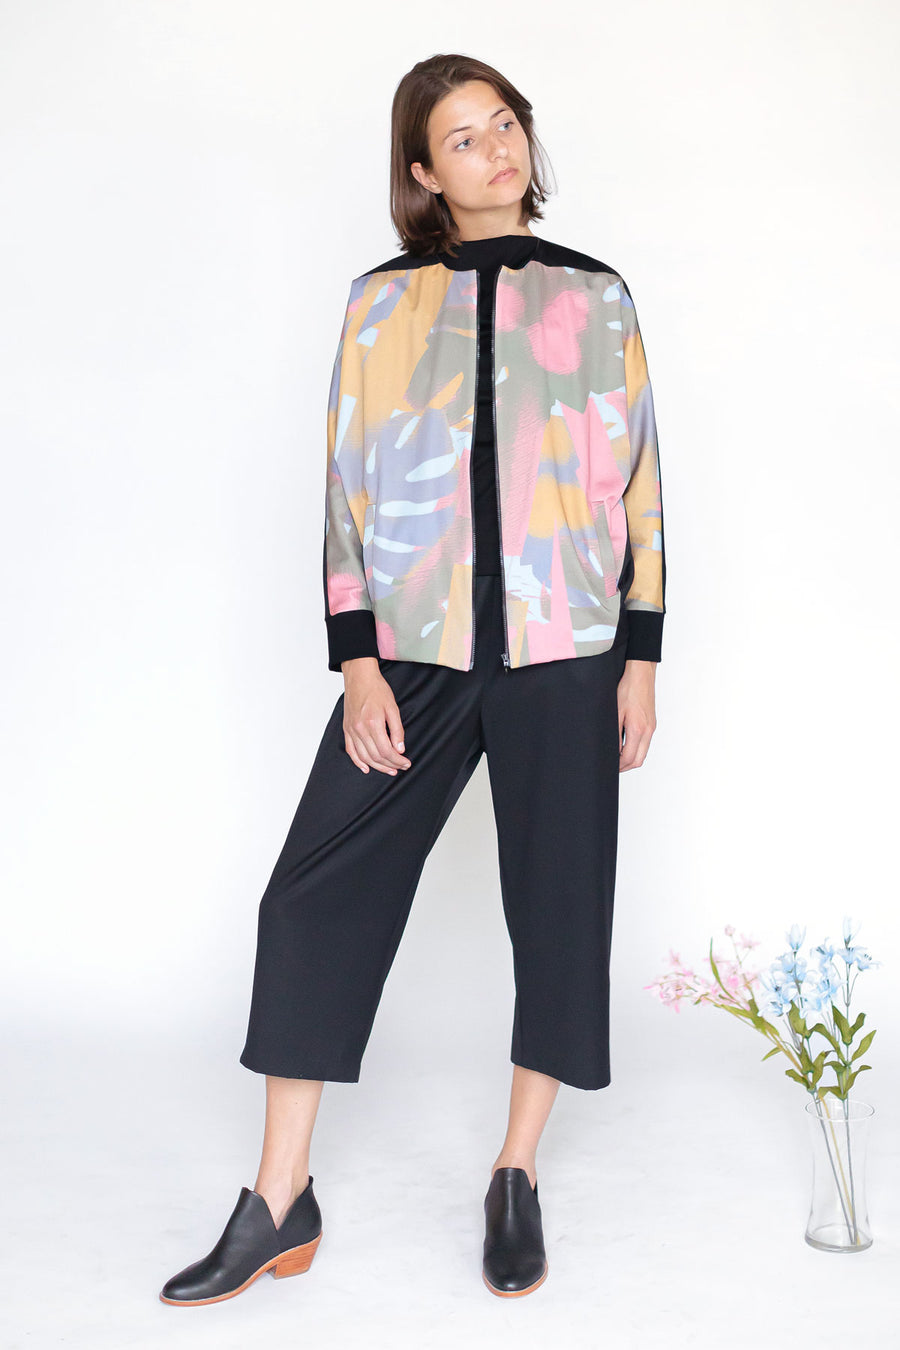 Zip up jacket with abstract pattern and black culottes for women